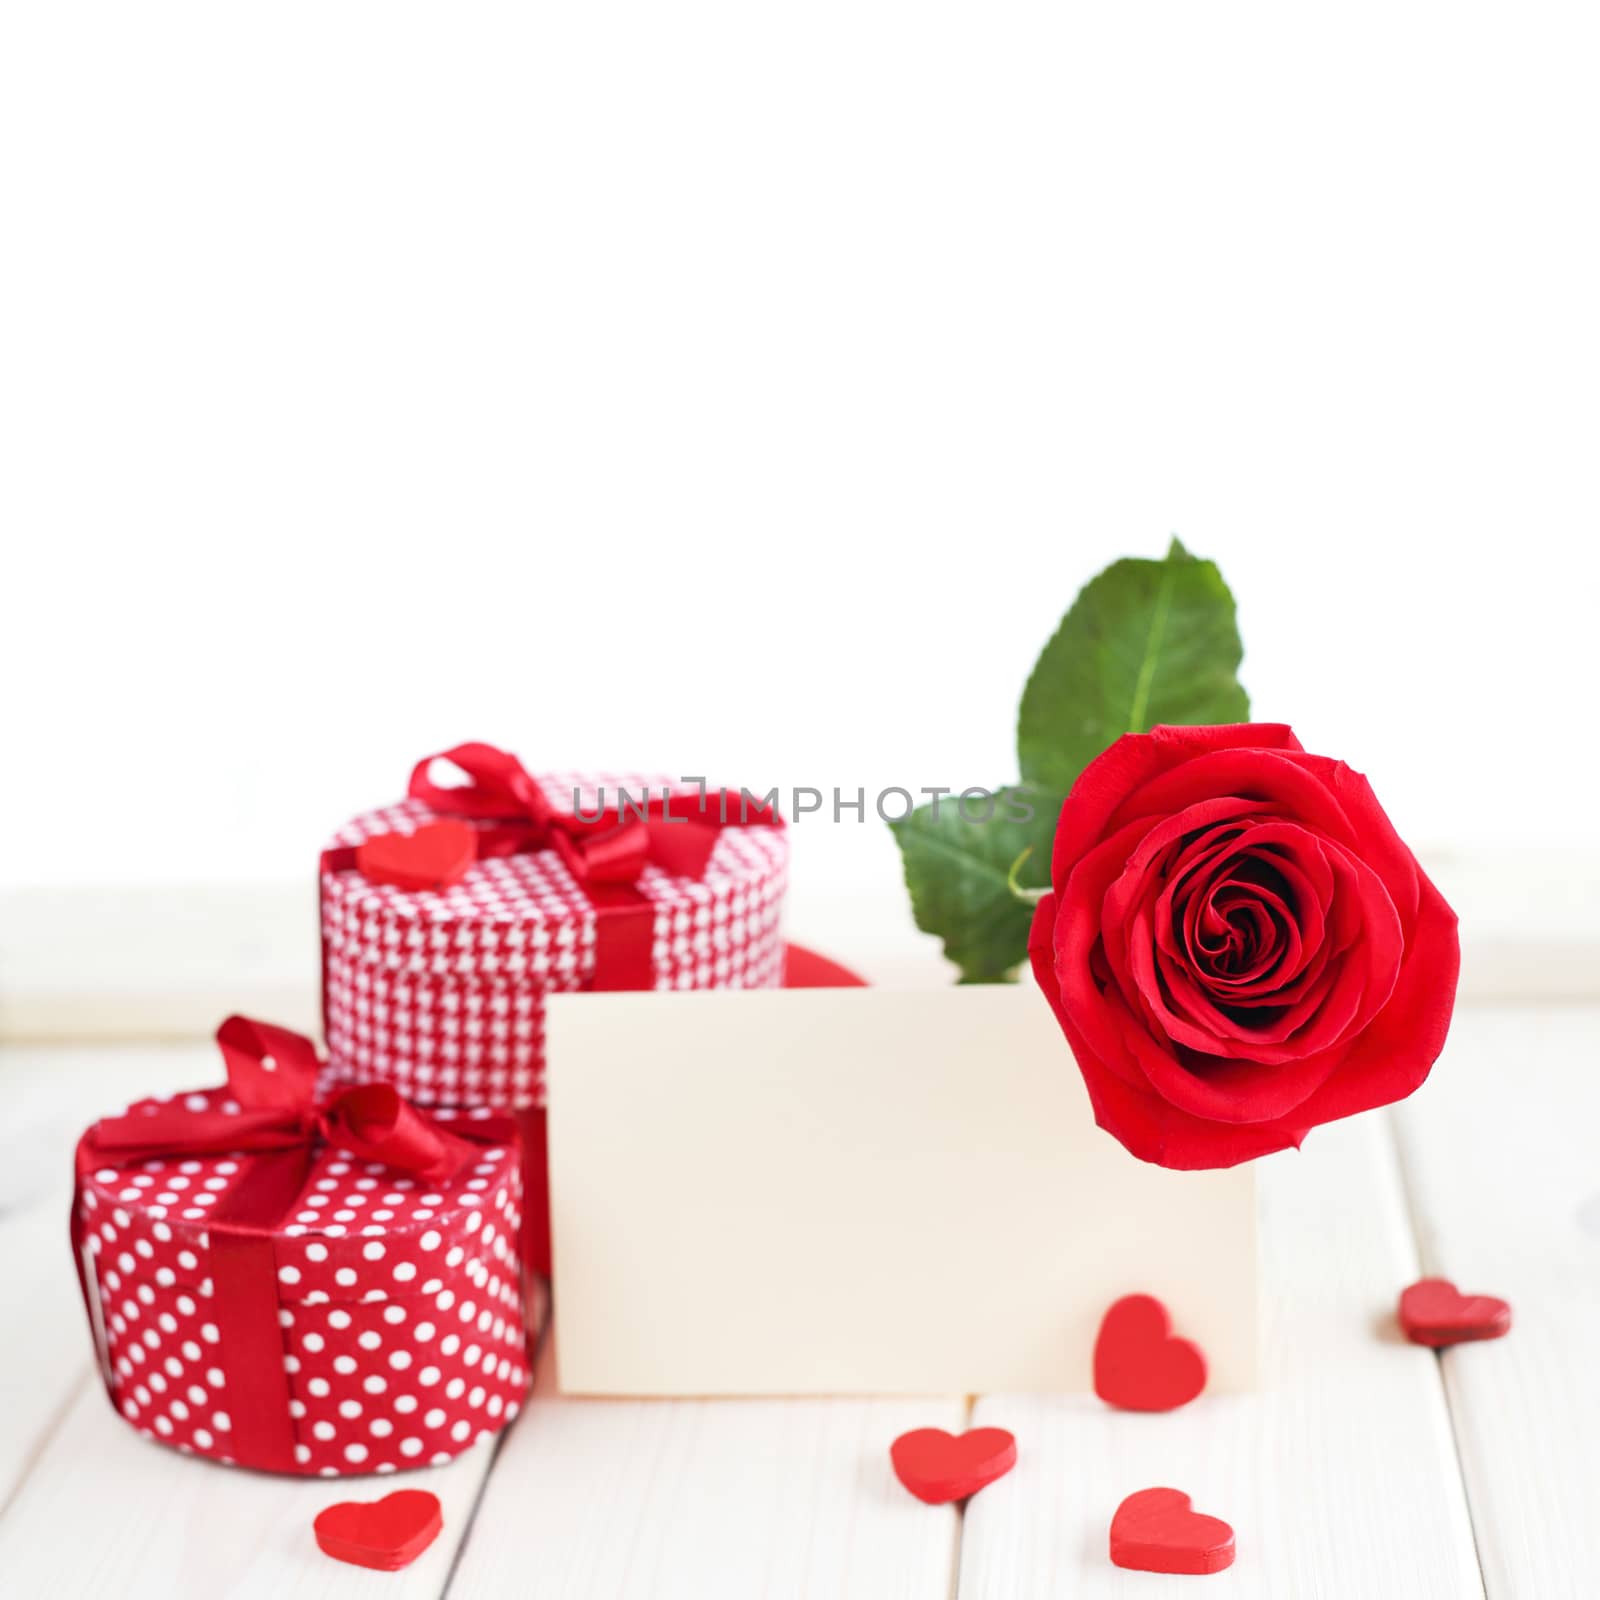 Rose, hearts and card on table by destillat